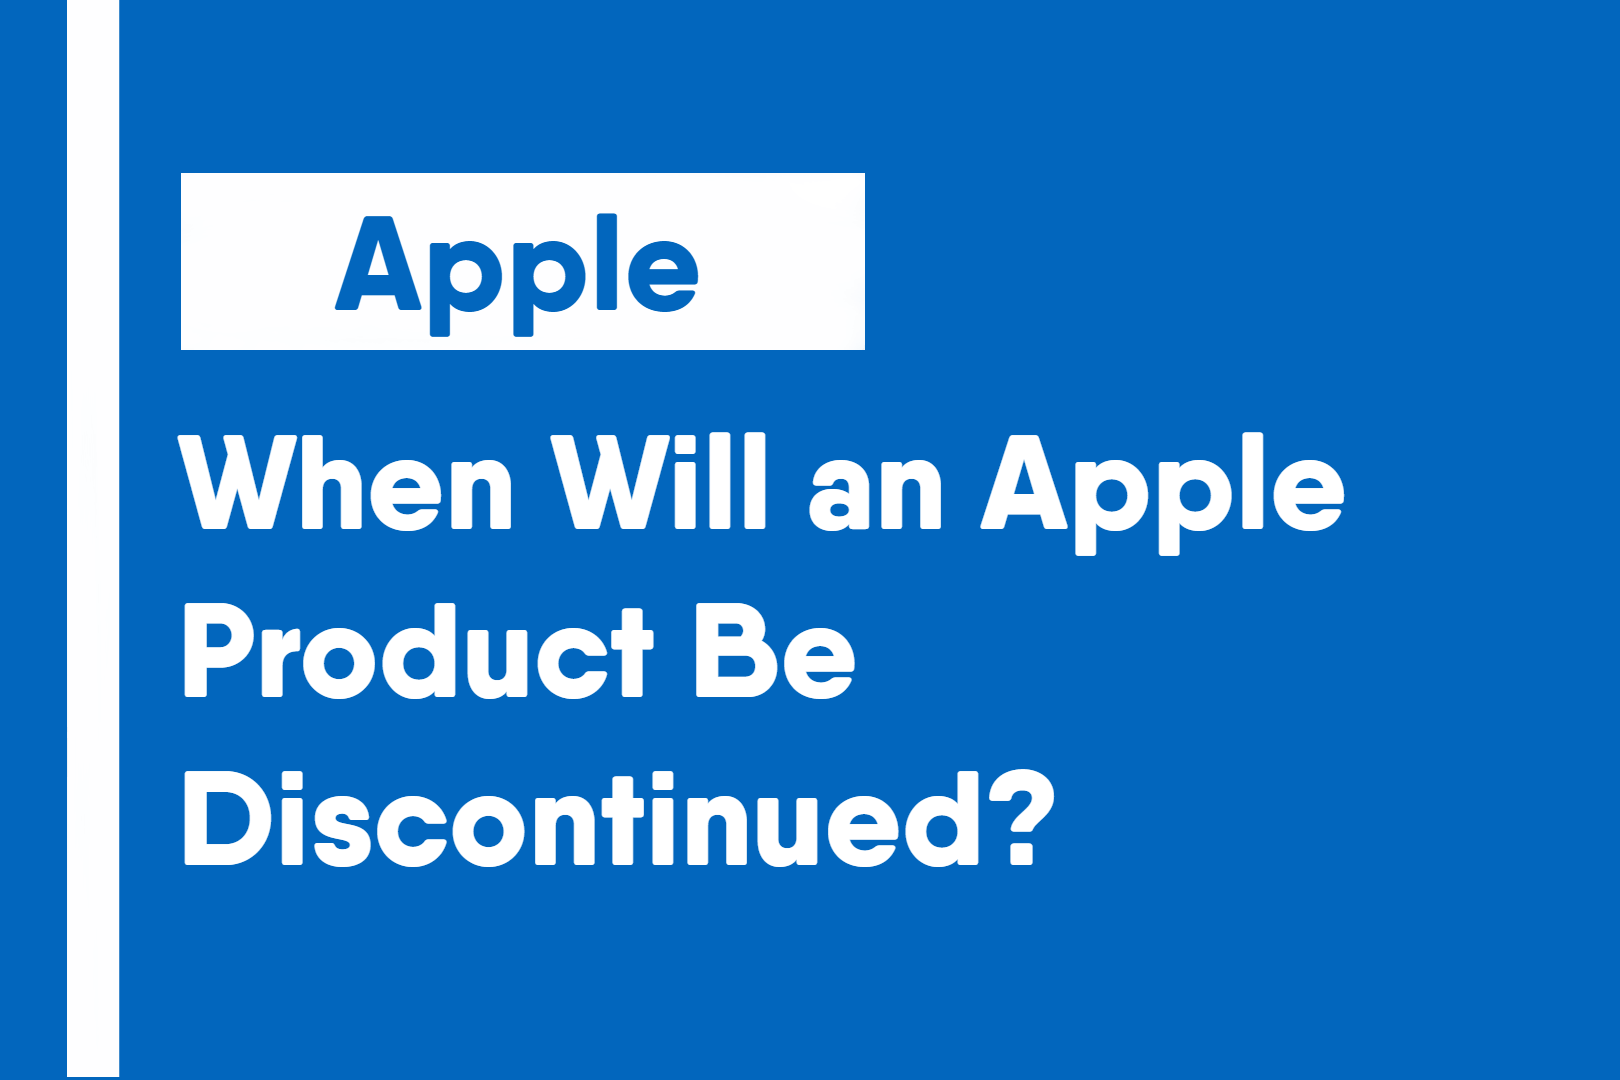 When Will an Apple Product Be Discontinued